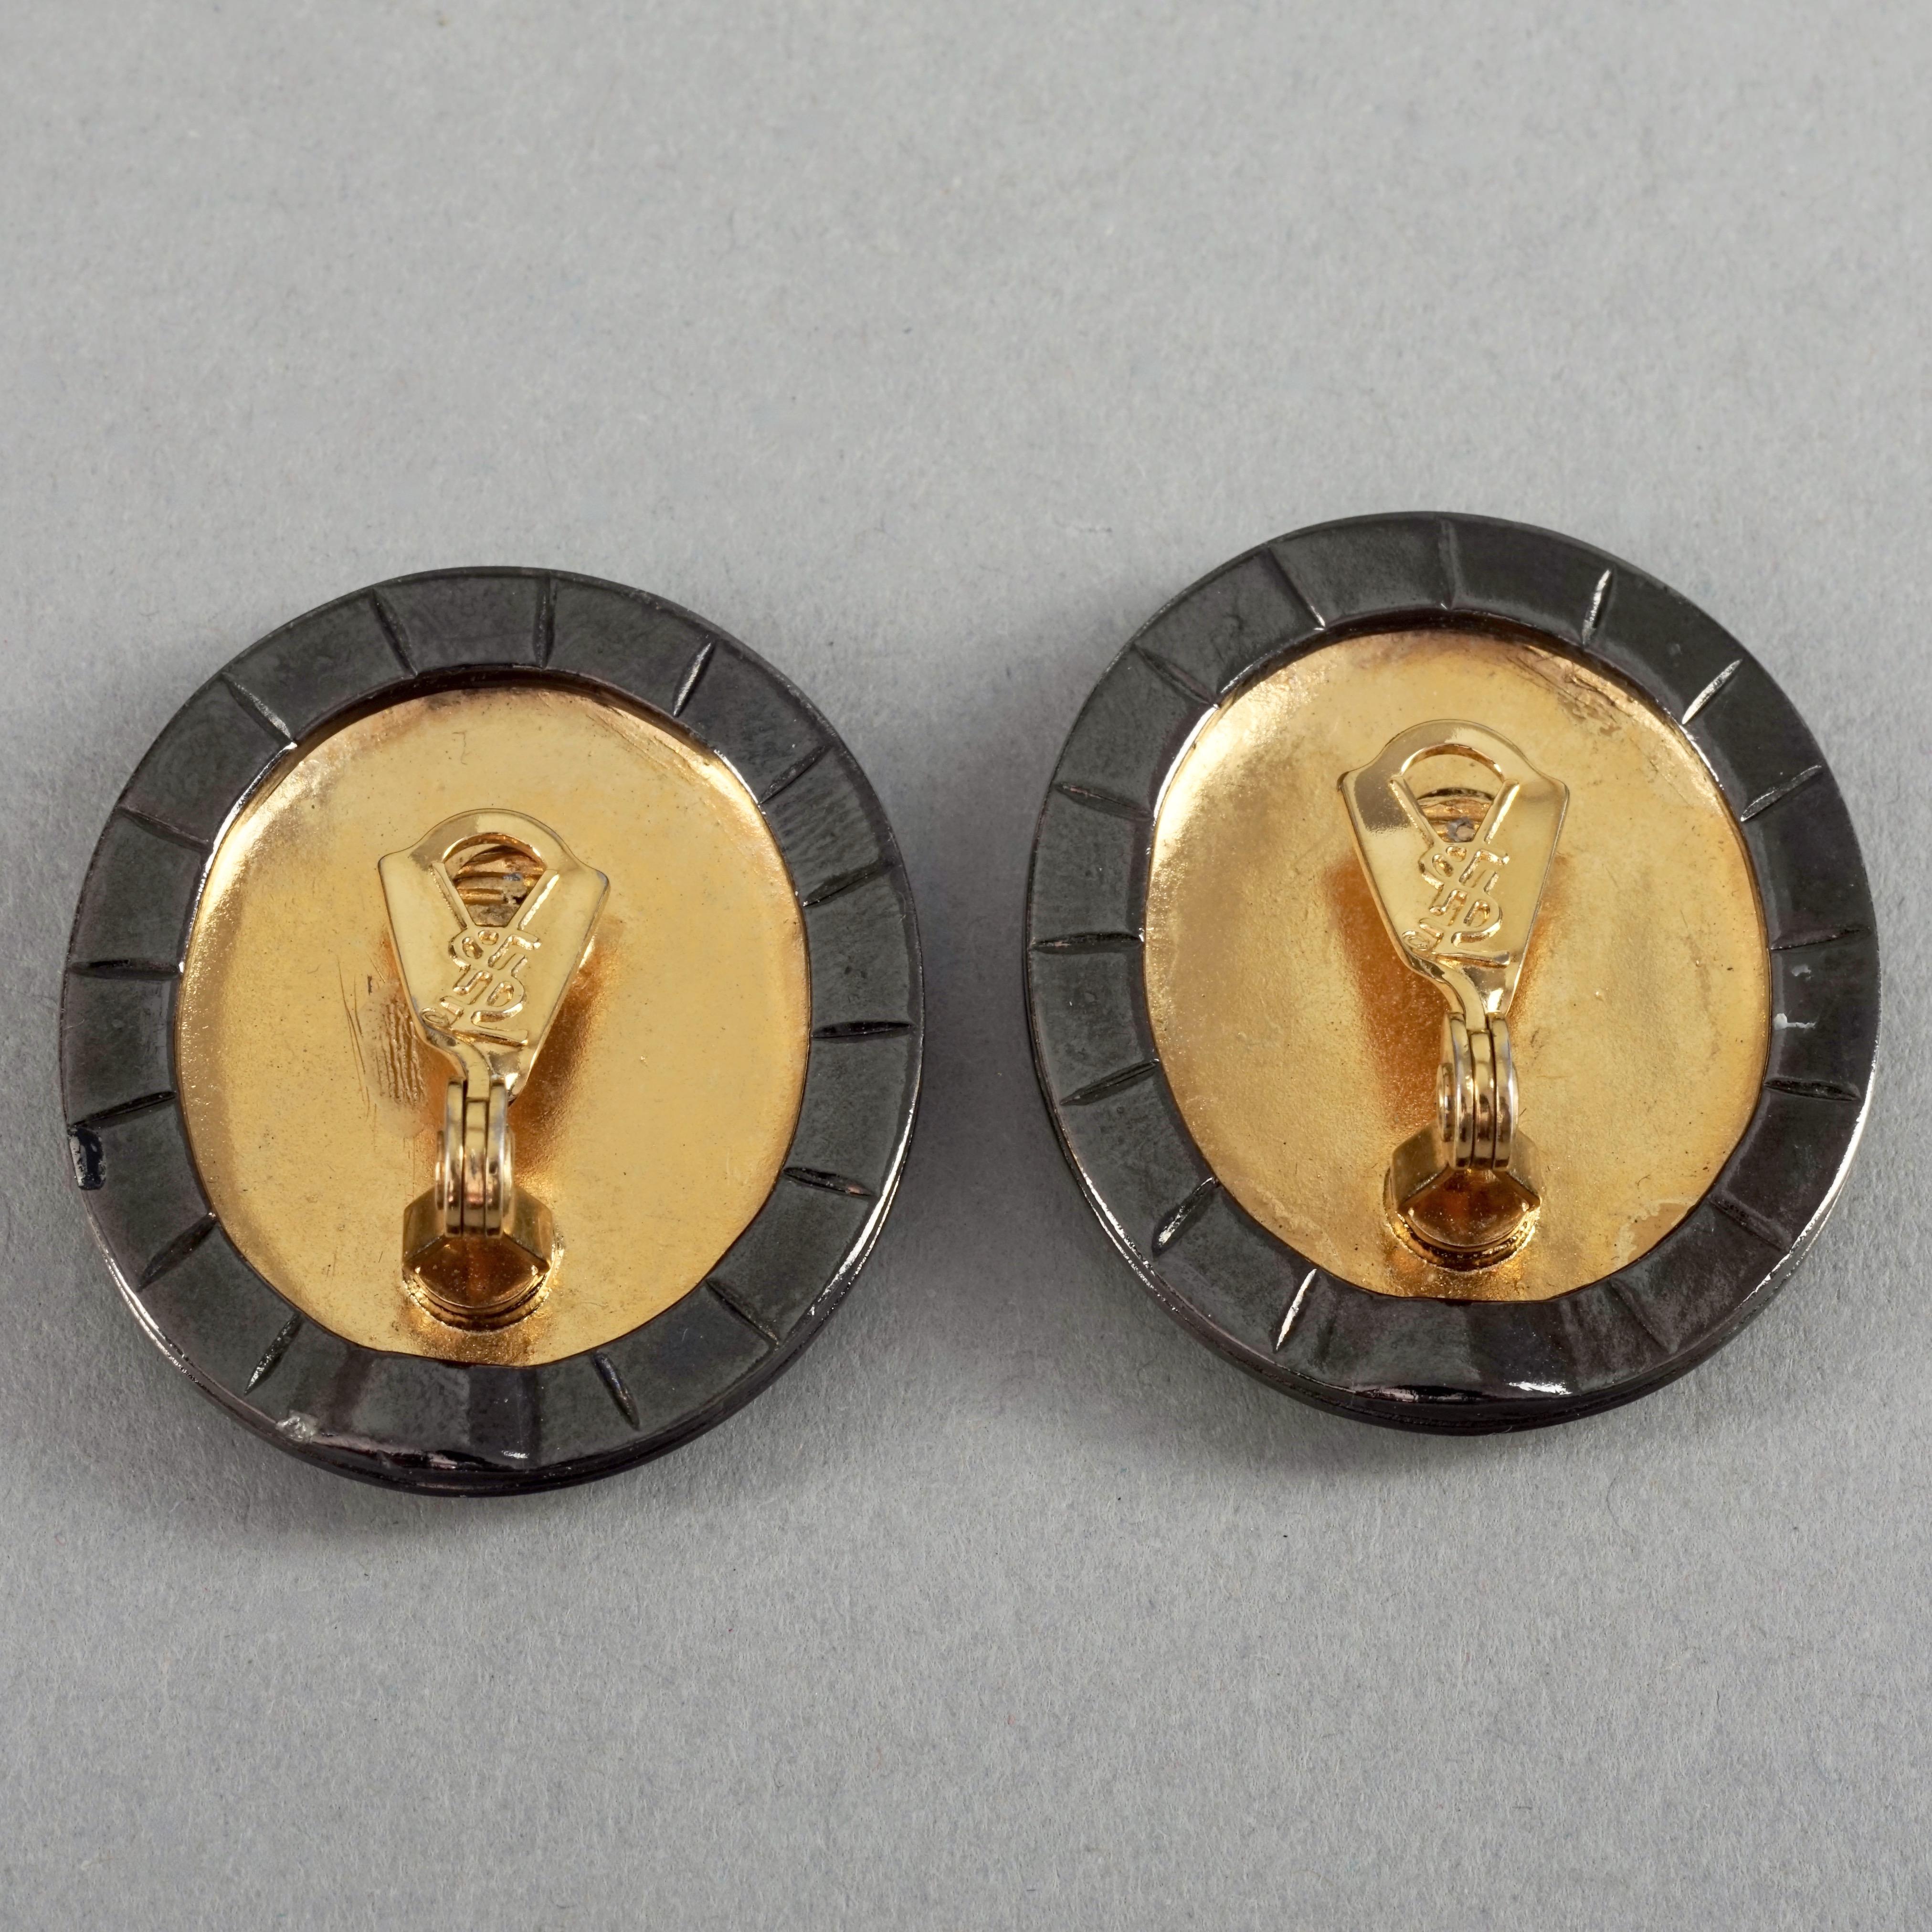 Vintage YVES SAINT LAURENT Ysl Two Tone Textured Oval Disc Earrings For Sale 5